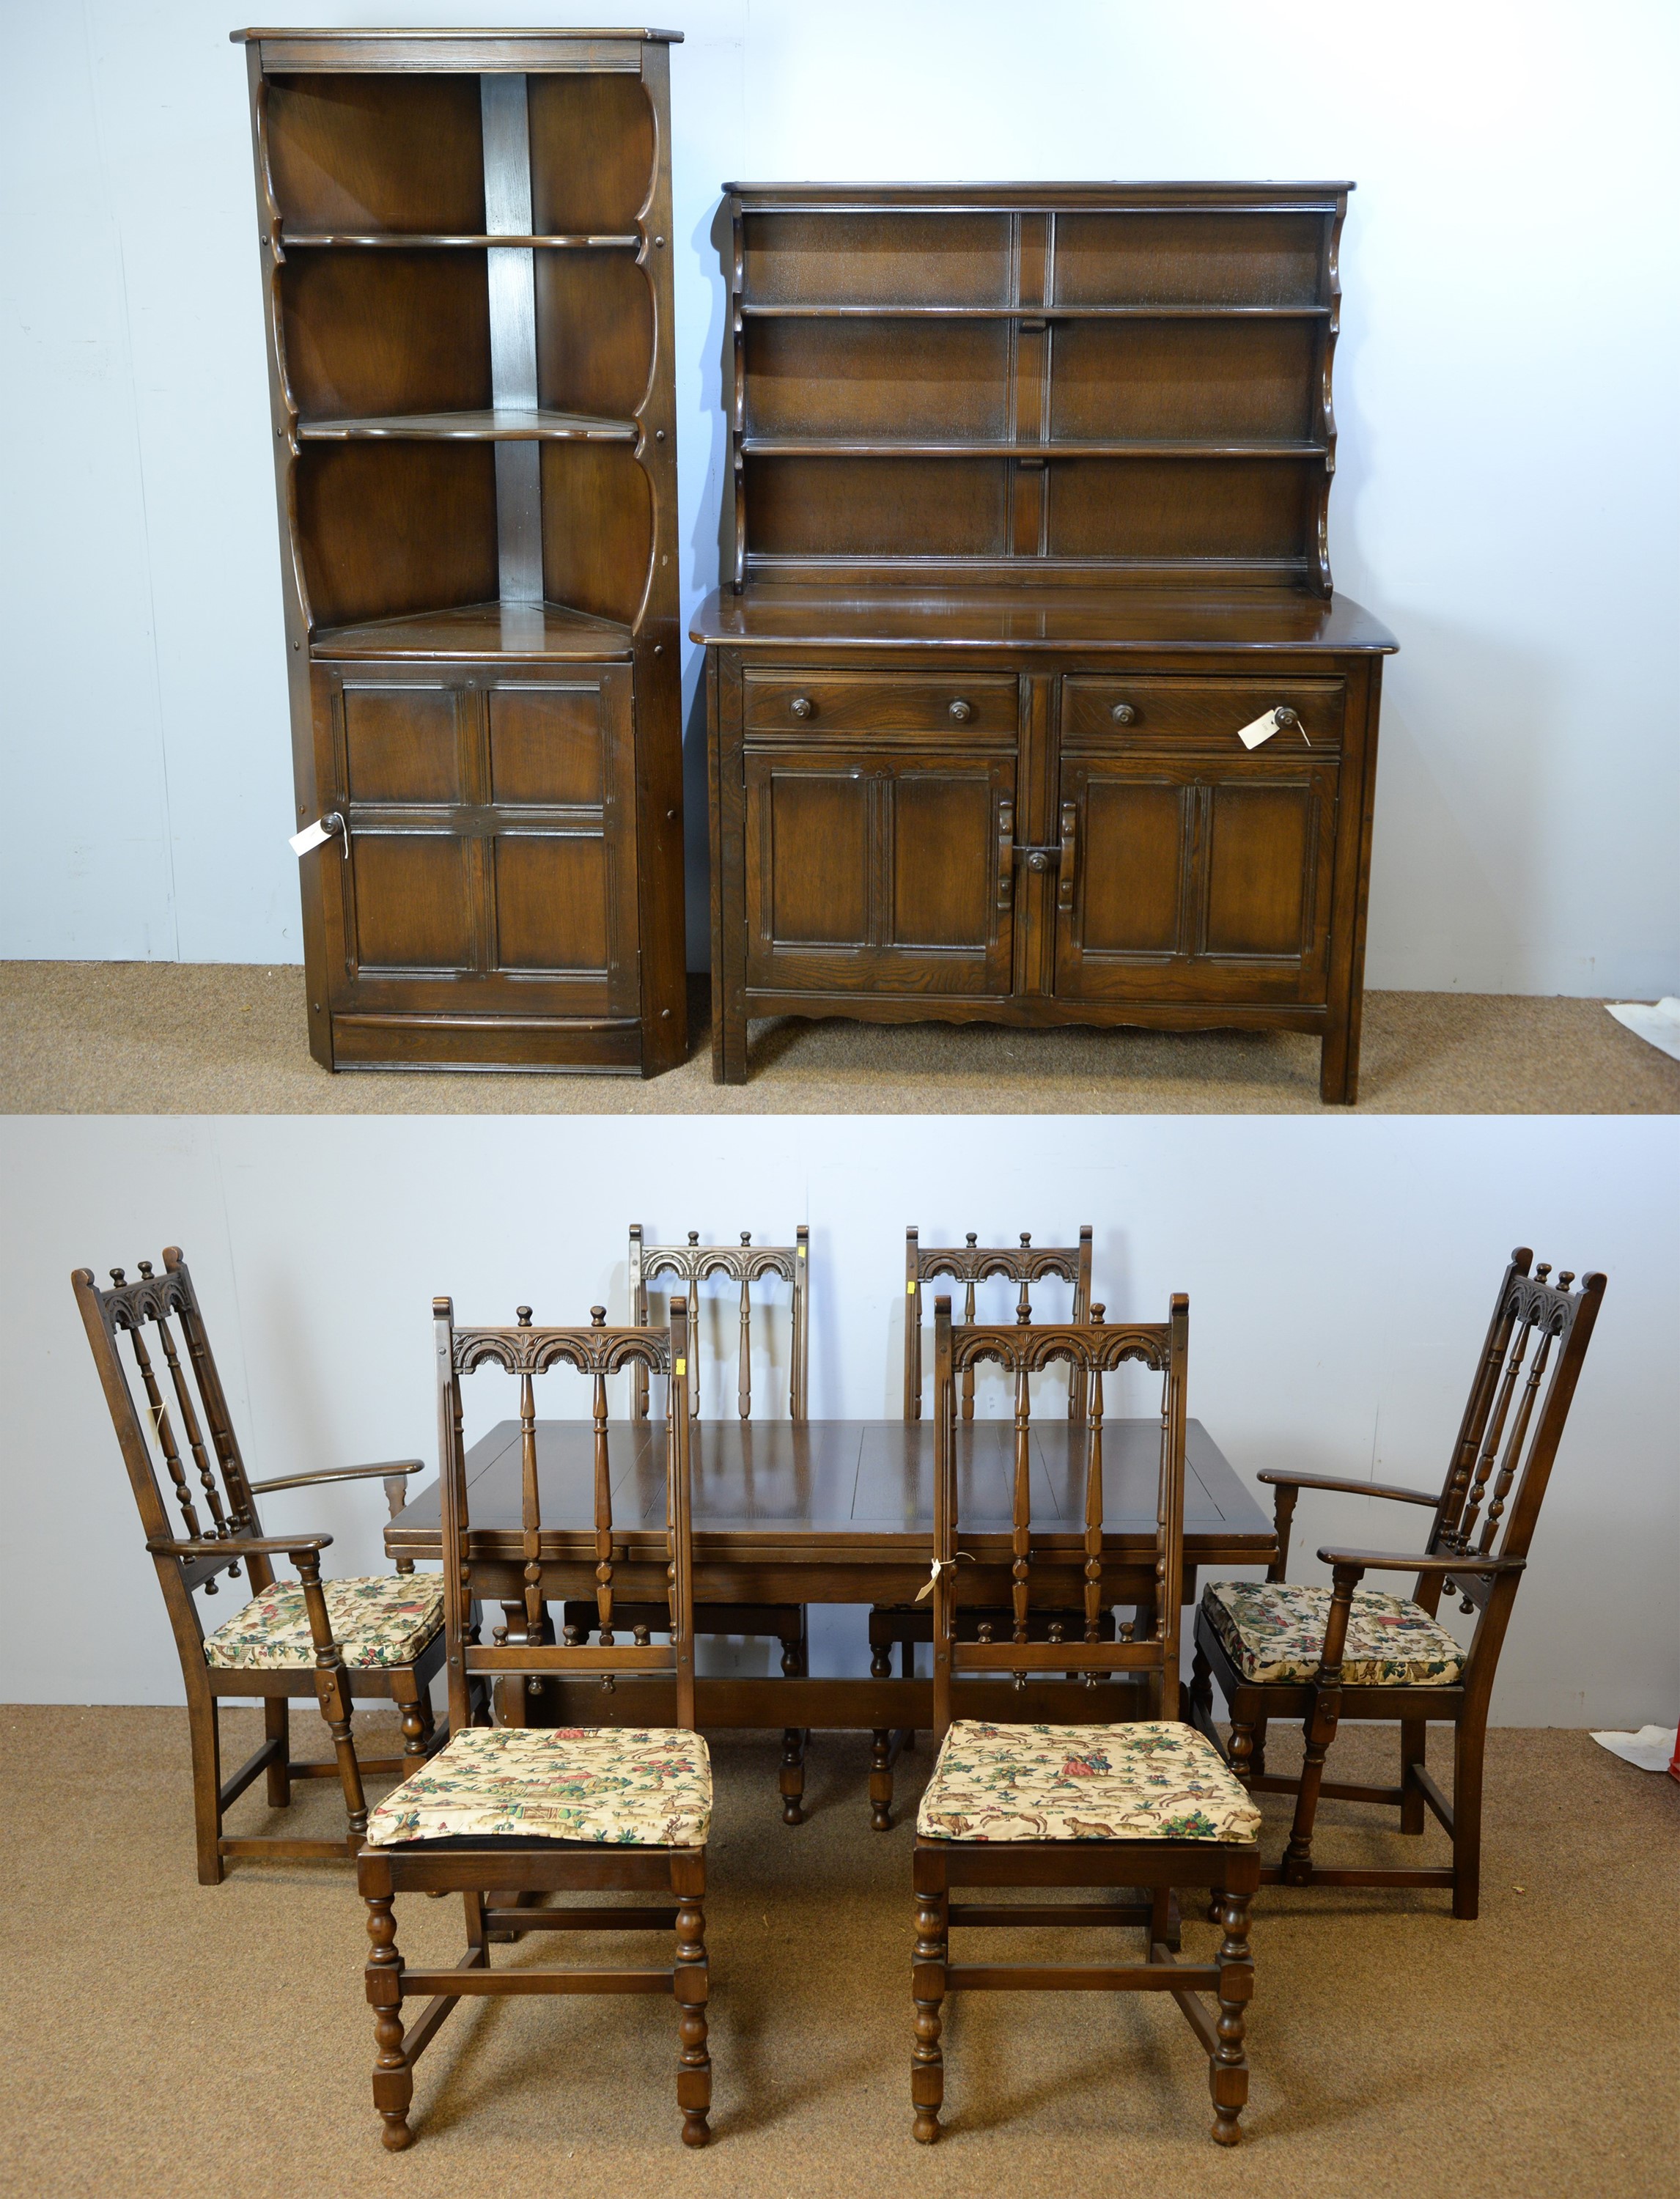 Ercol Old Colonial dining room furniture.